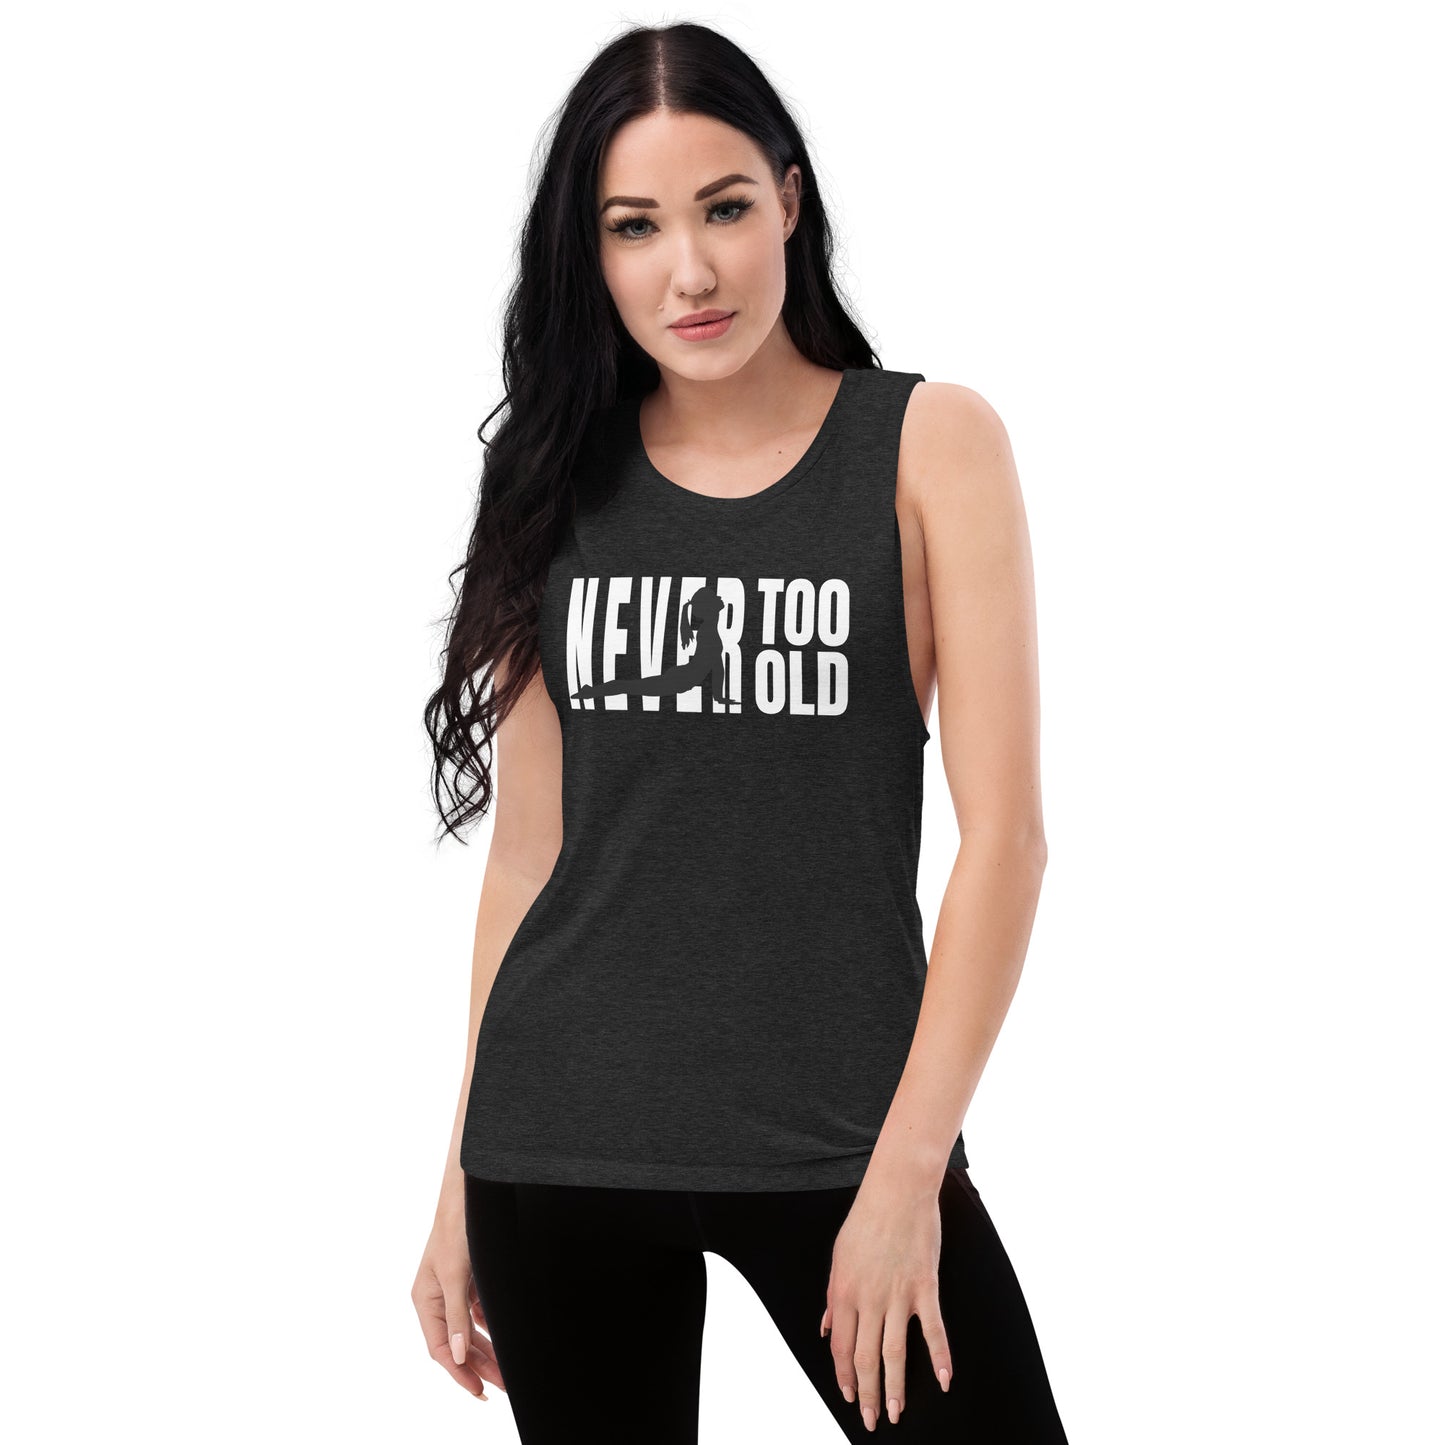 Never Too Old Ladies’ Muscle Tank